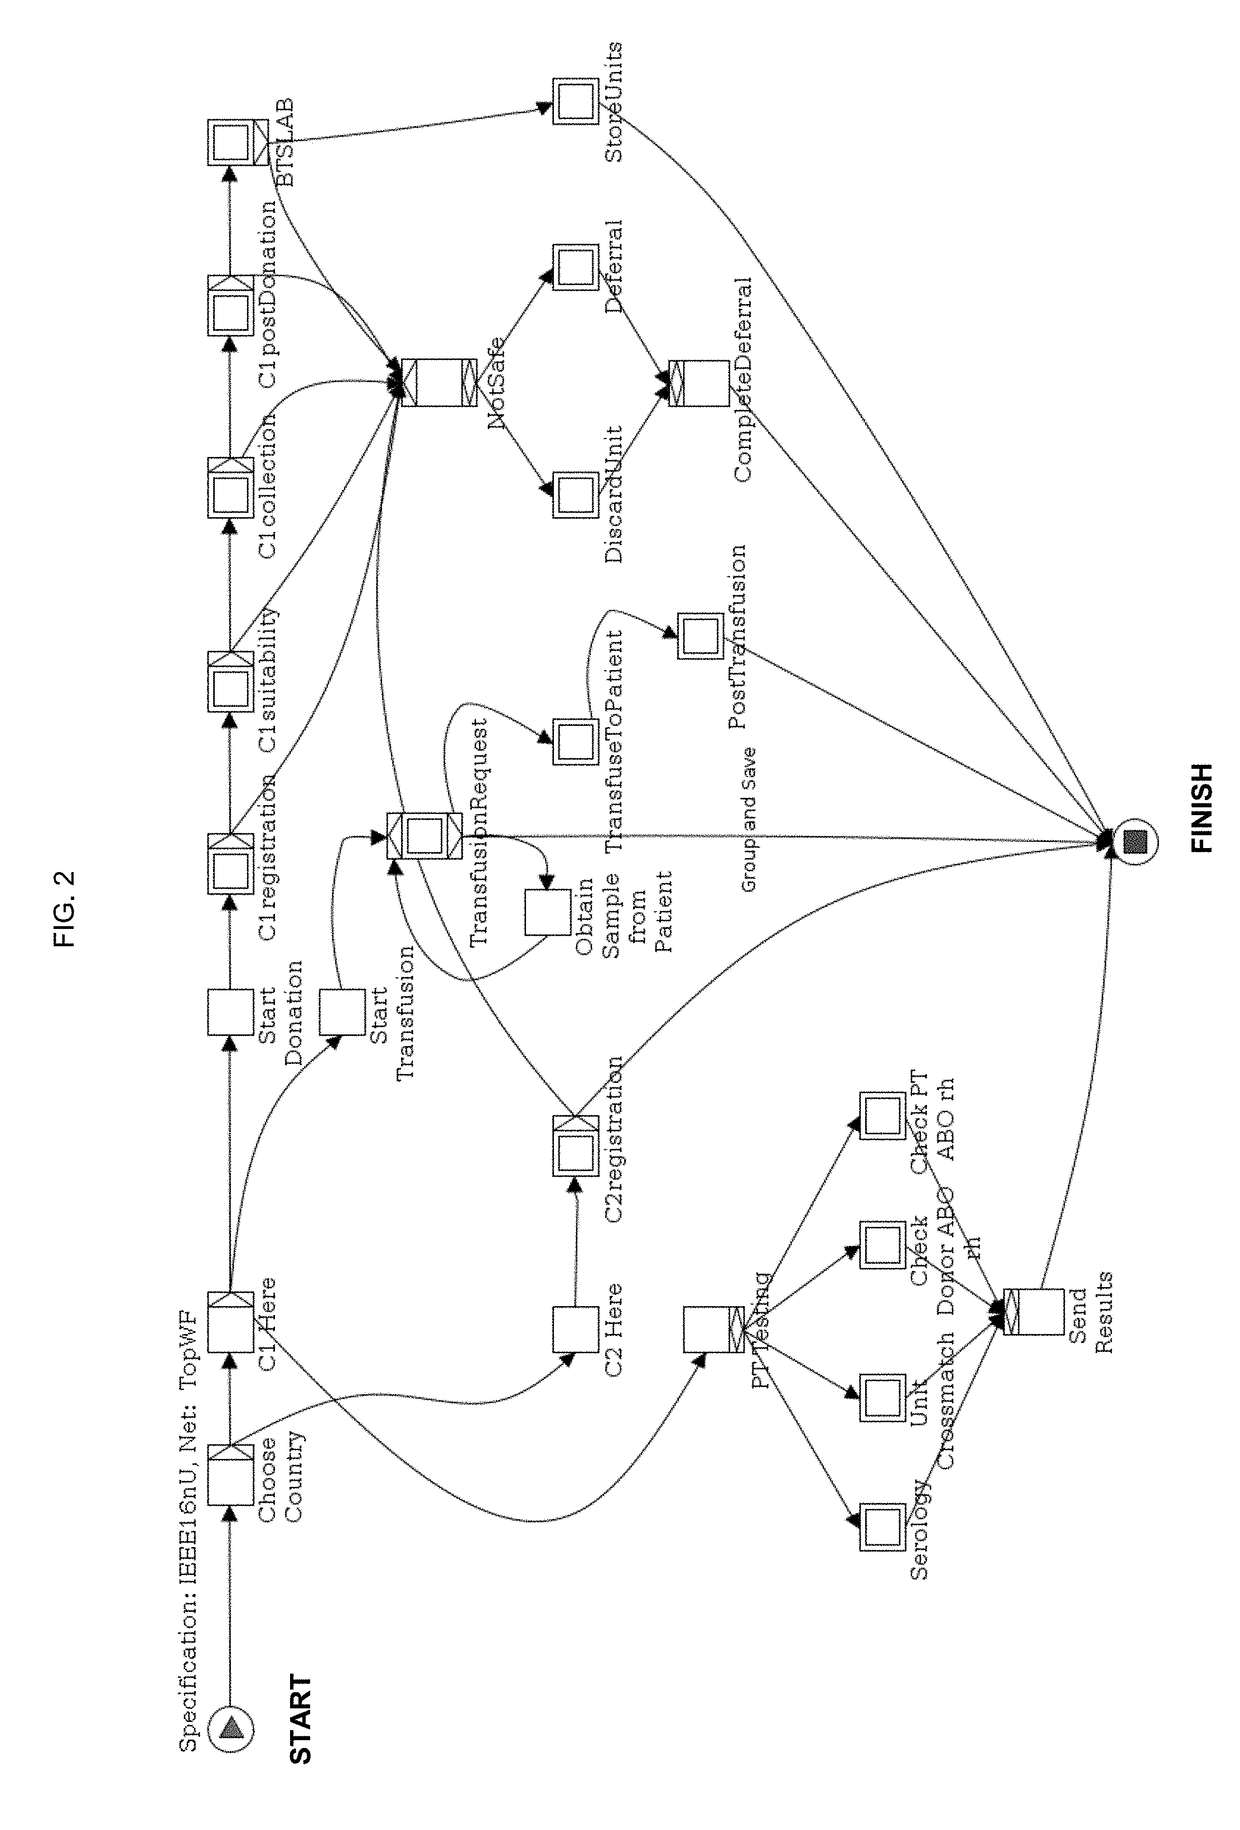 Automated system and method for blood safety workflow verification and validation